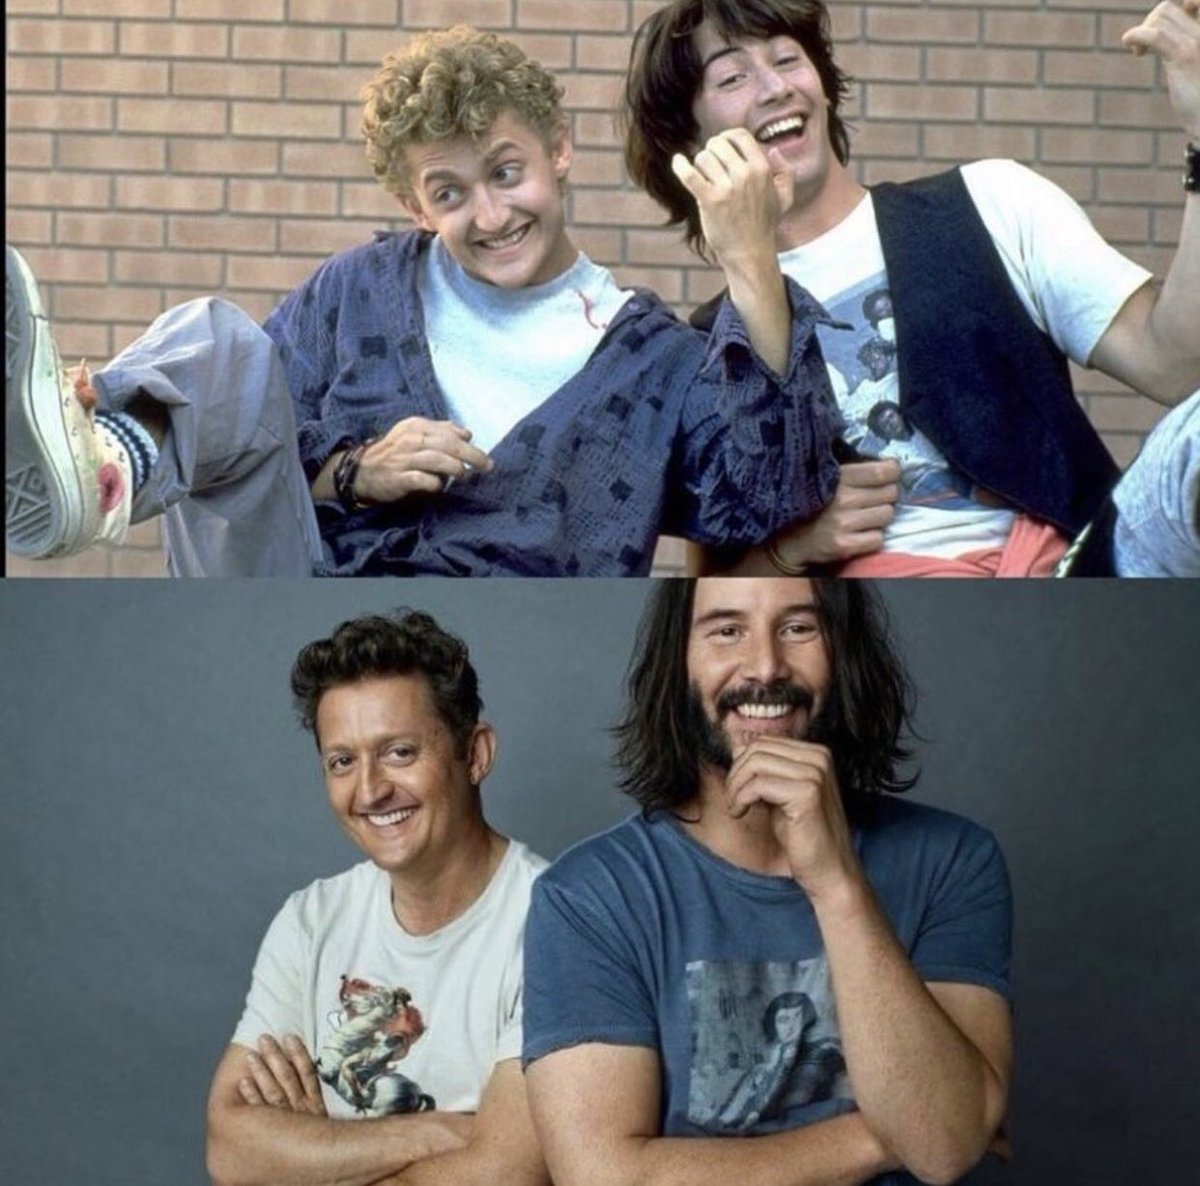 The More Things Change, The More They Stay the Same.

#BillAndTed #Movie #KeanuReeves #AlexWinter #SciFi #Comedy